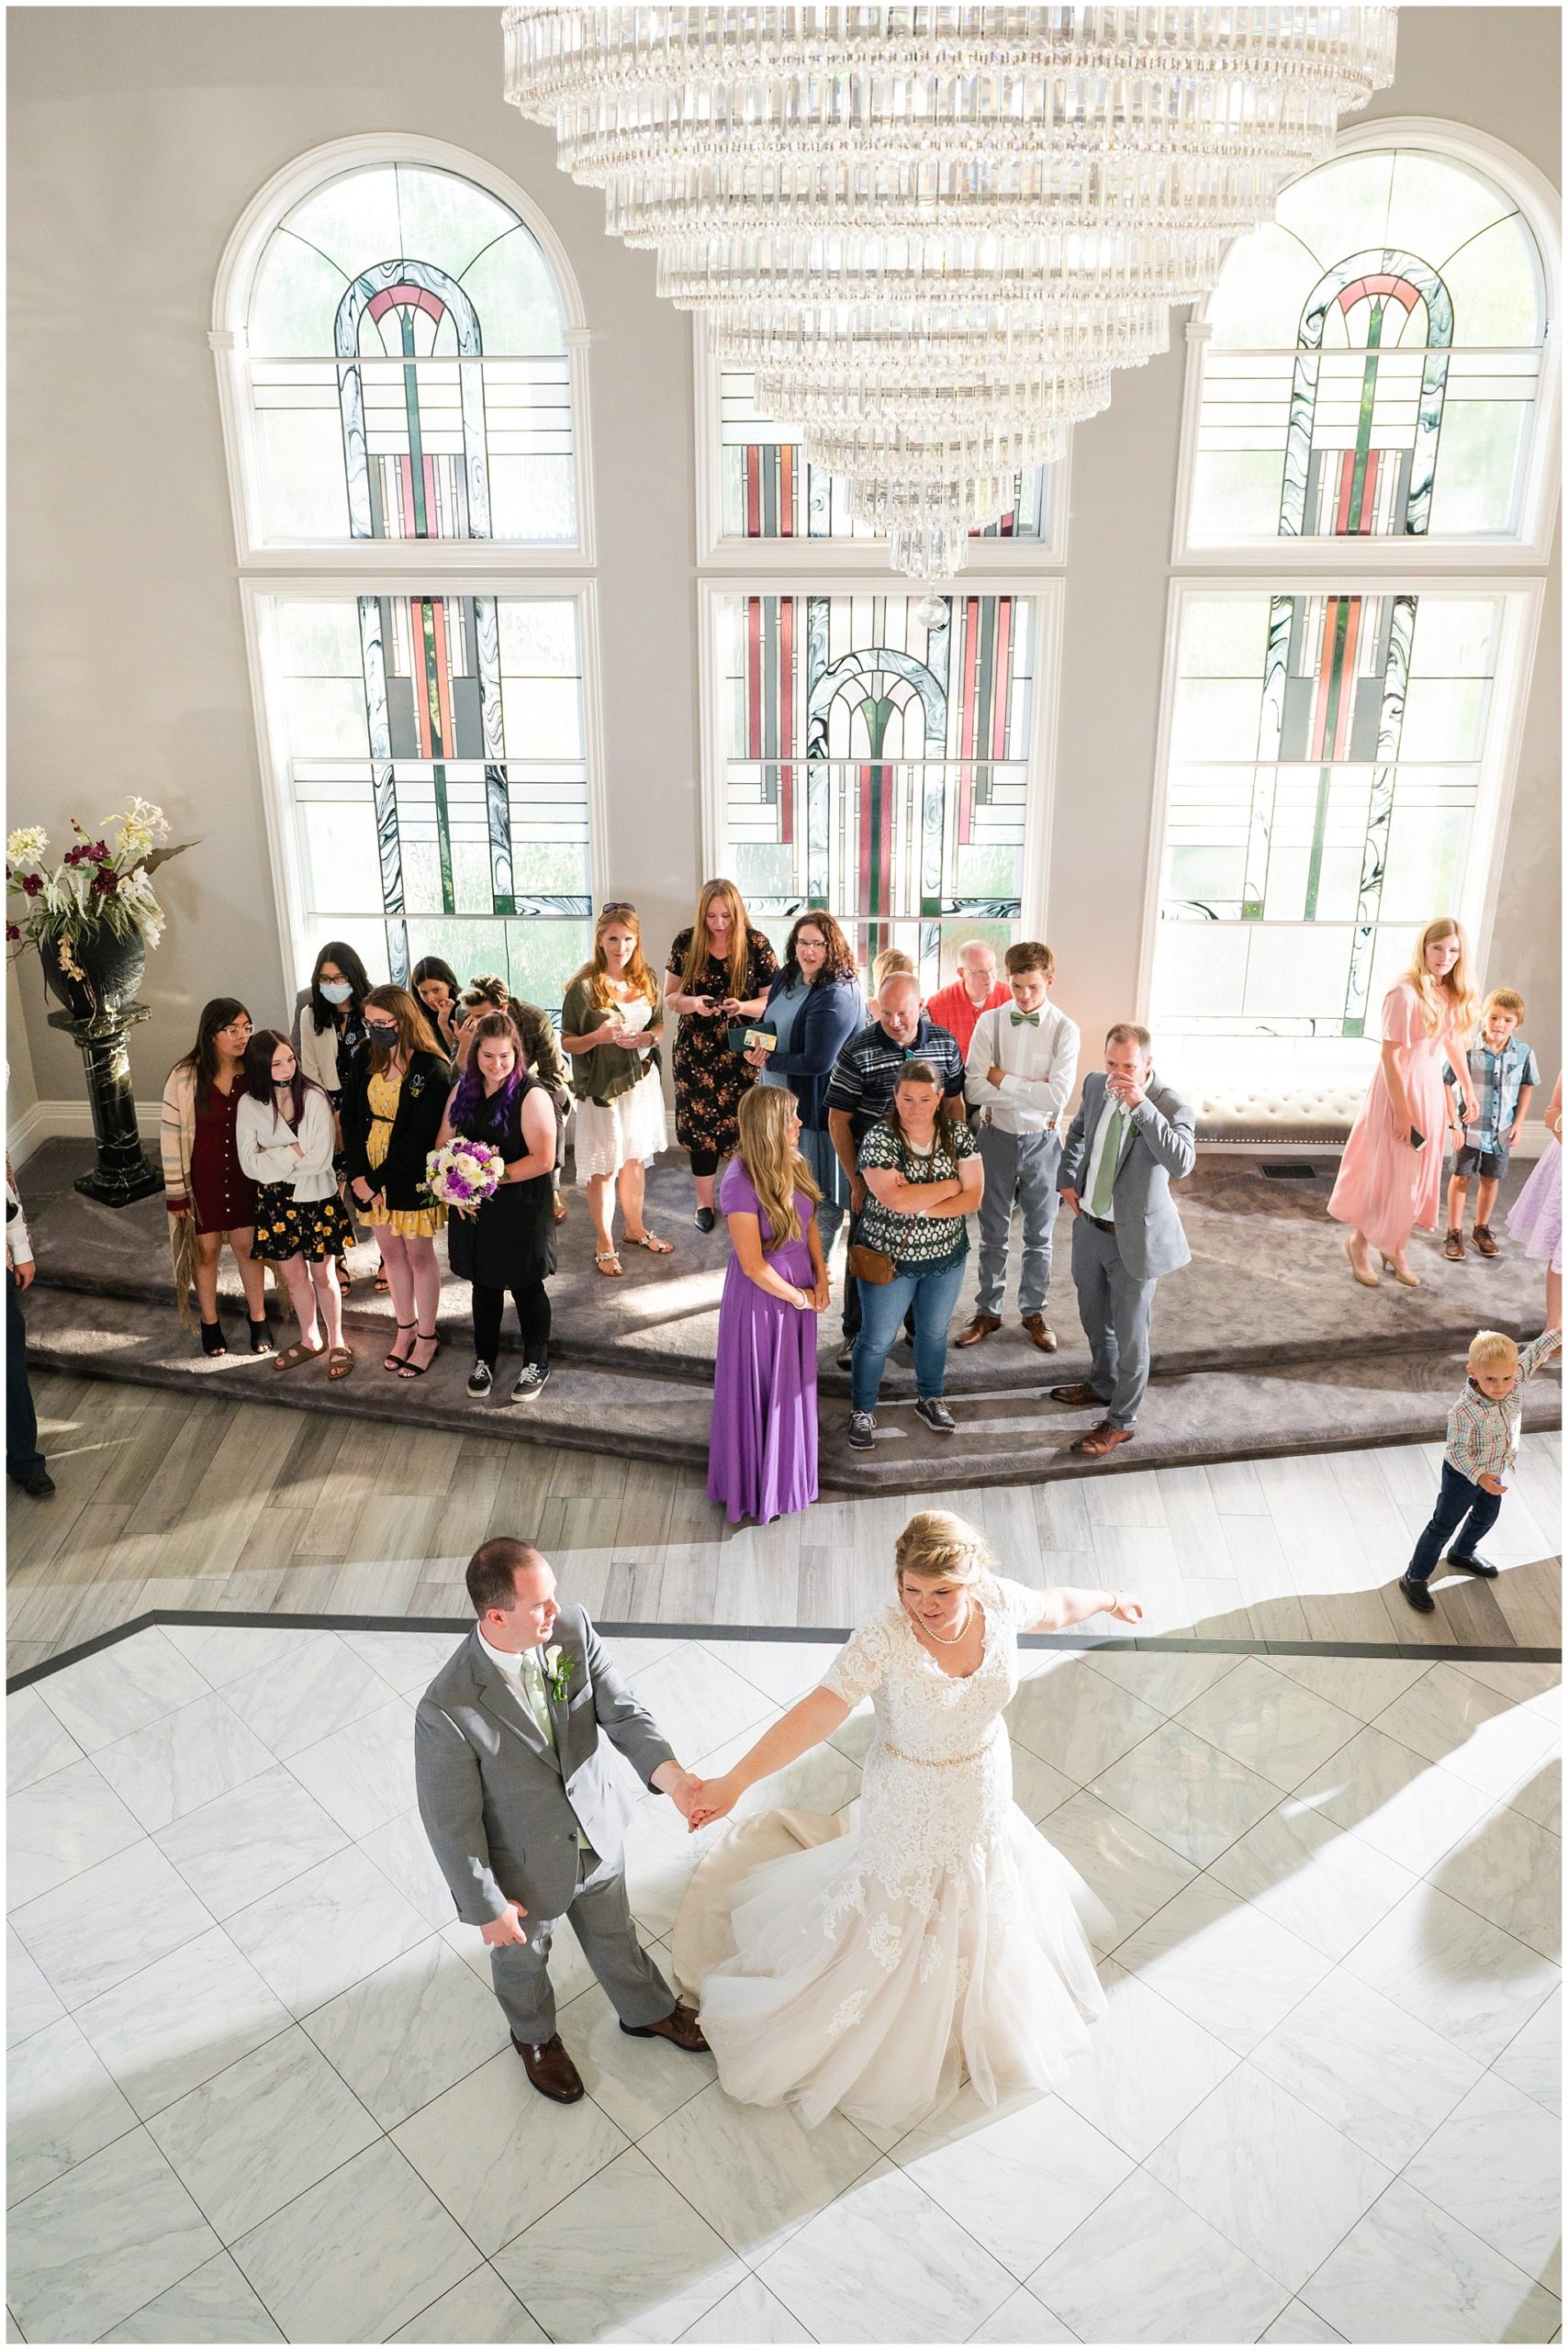 First dance | Oquirrh Mountain Temple and Millennial Falls Wedding | Jessie and Dallin Photography